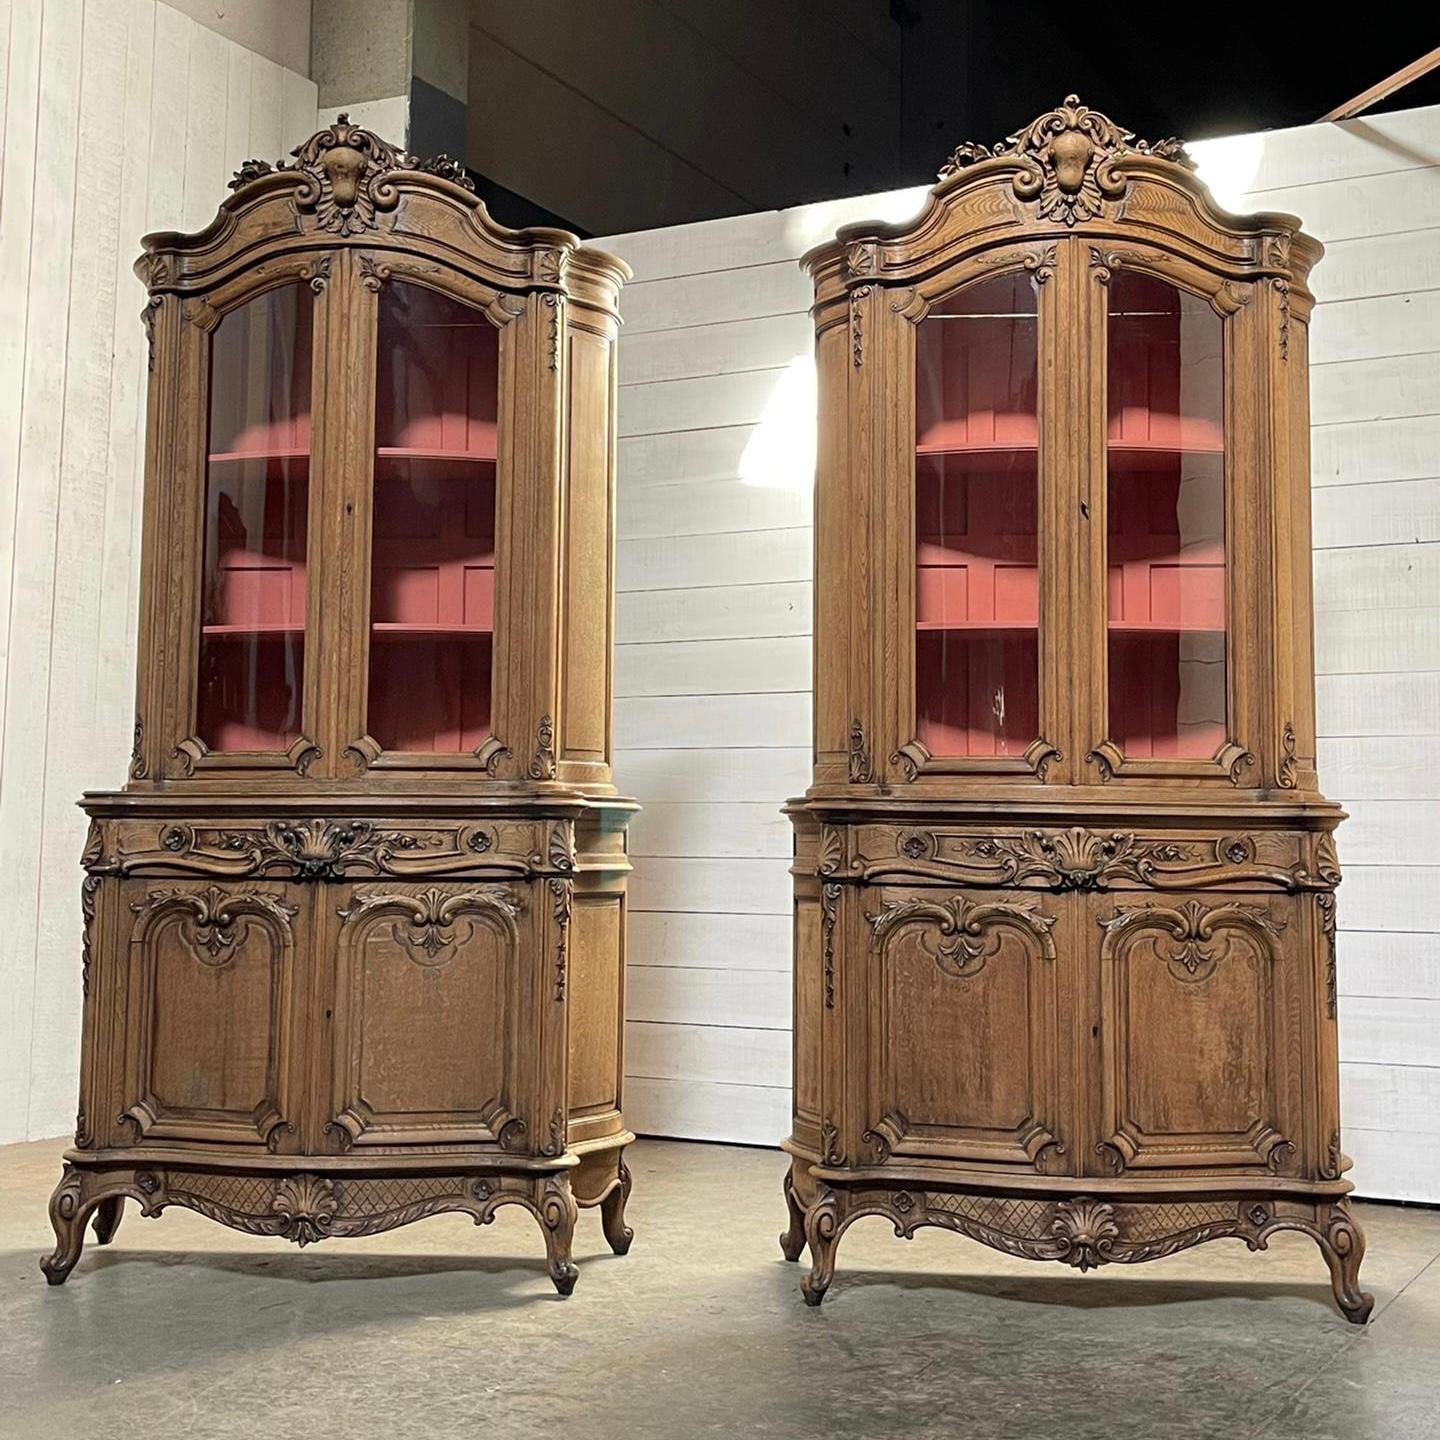 A very impressive and impossible to find pair of French Regence style bookcases or cabinets. These have come from a Chateau in the Loire region. Dating to the early 19th Century and made from oak. The fronts and sides are serpentine in form and each